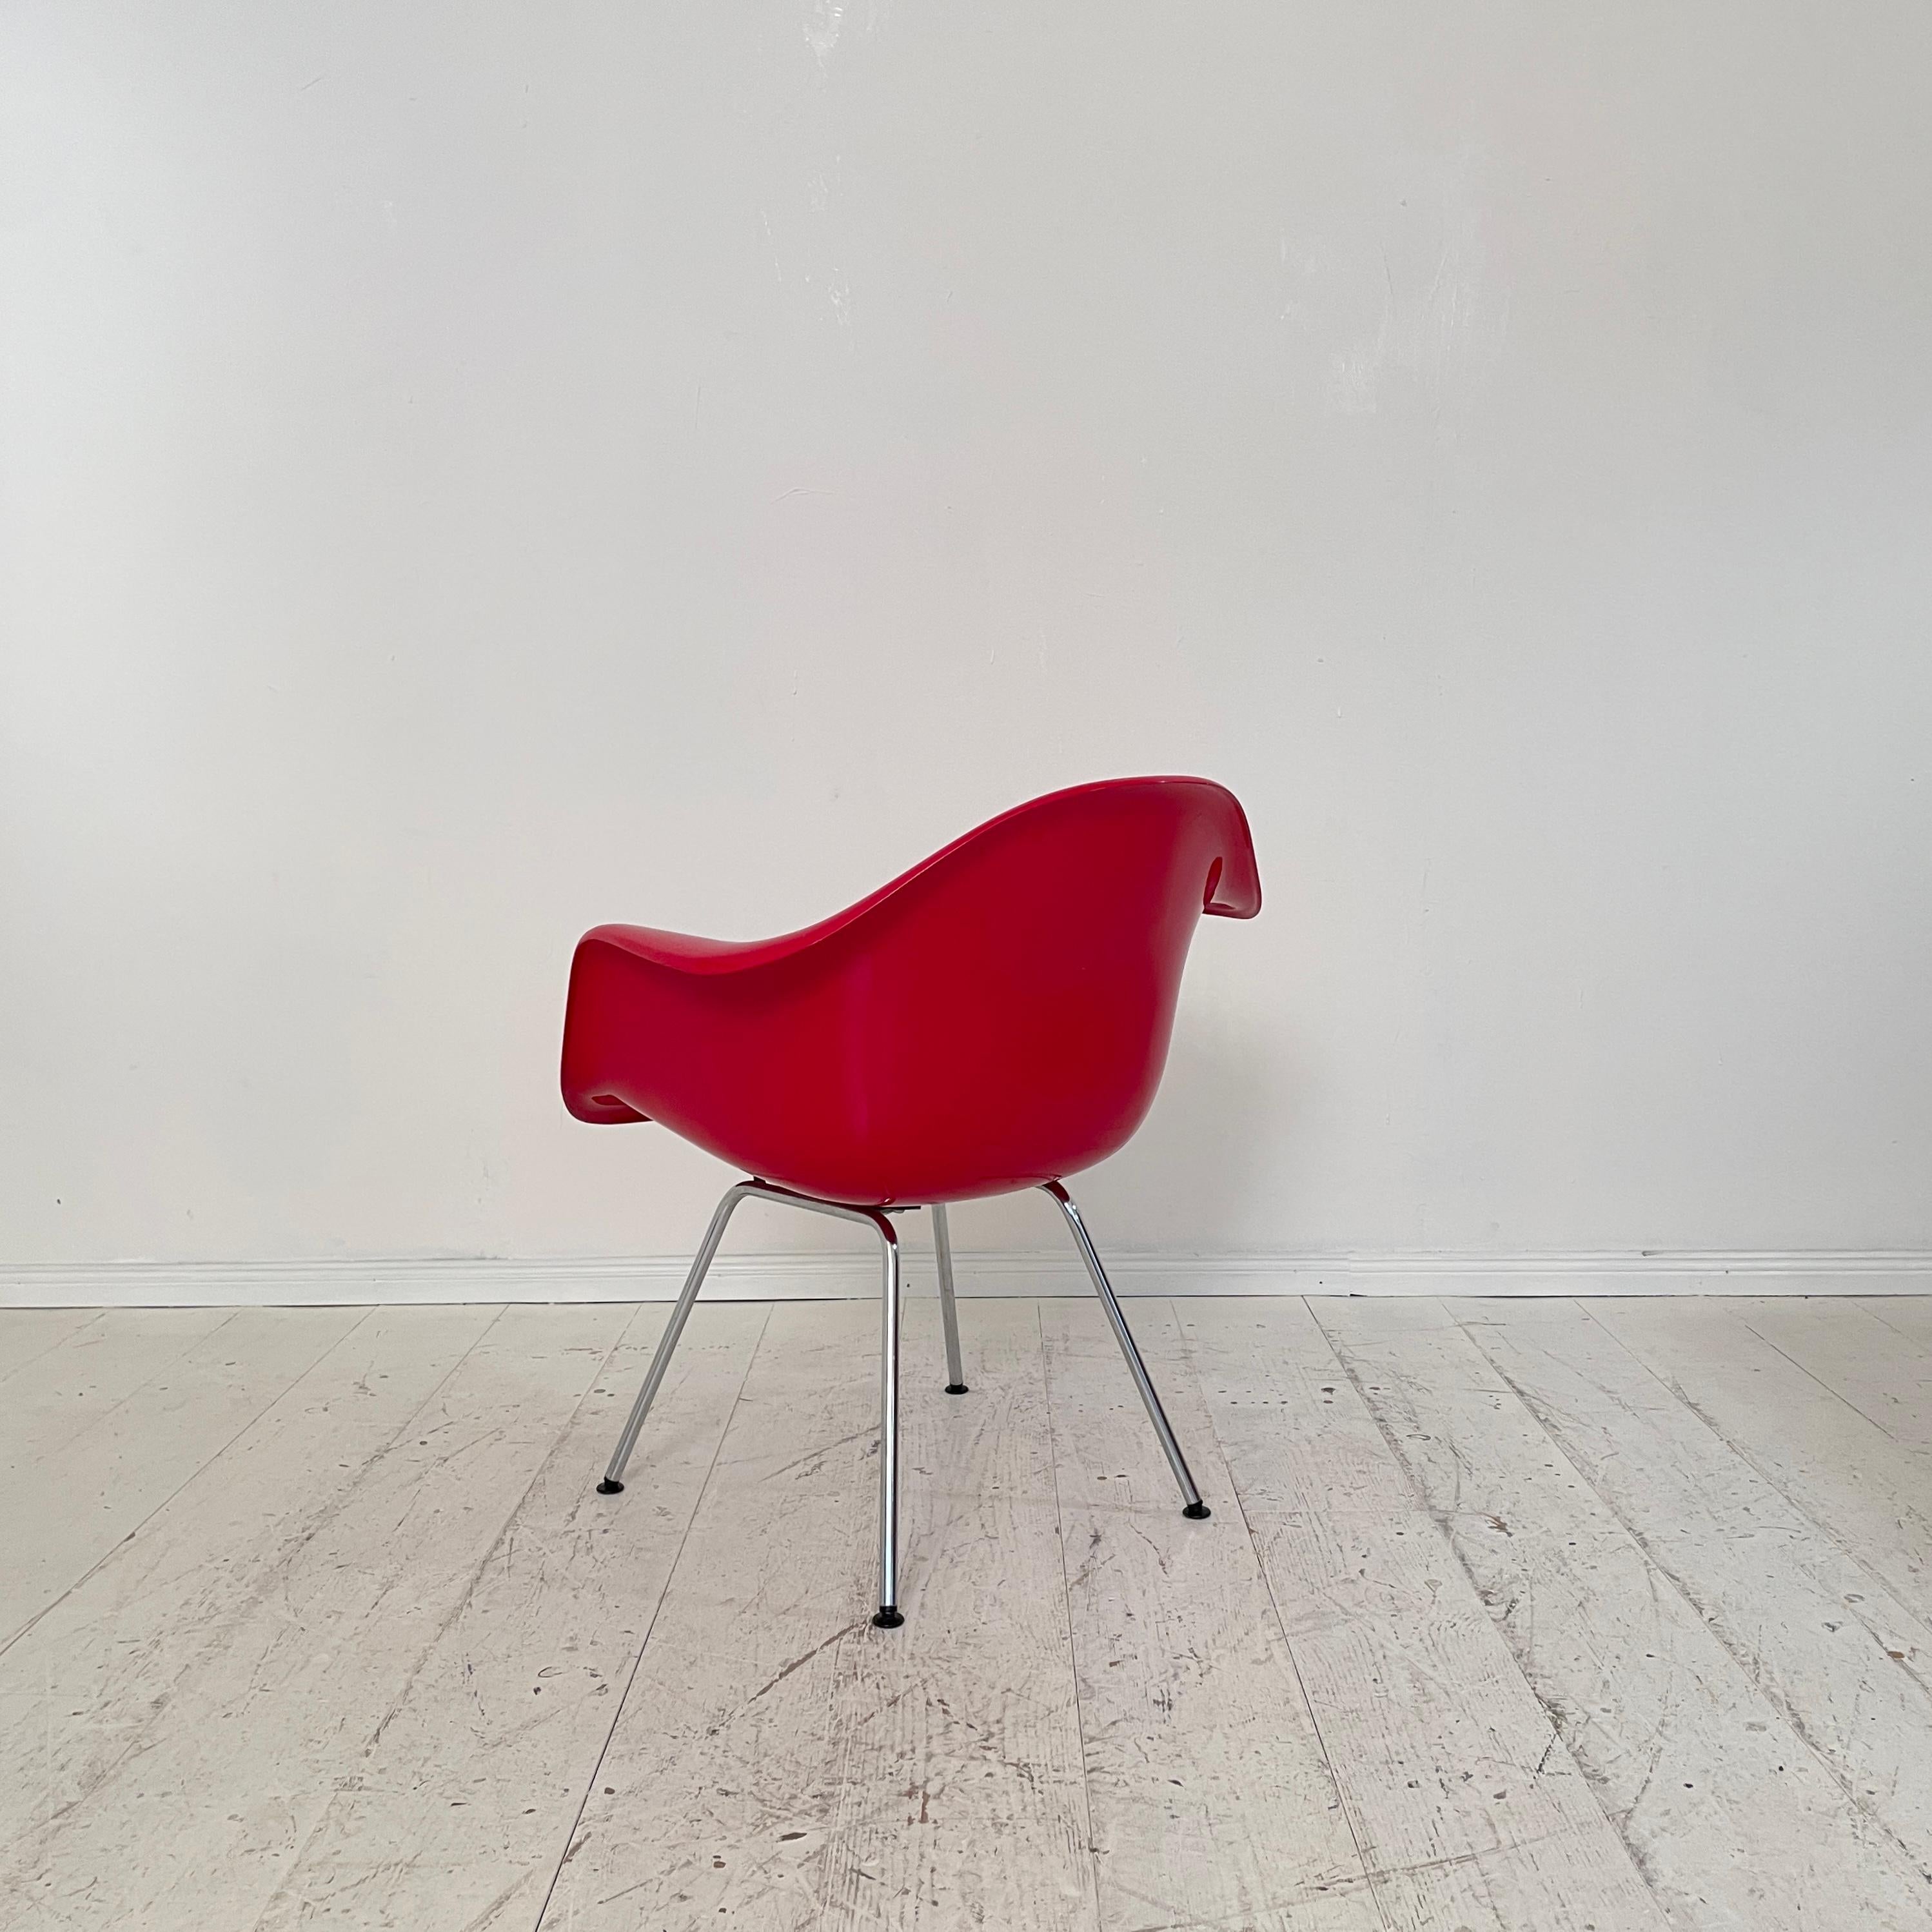 Mid-20th Century Red Dax Lounge Armchair by Charles & Ray Eames for Fehlbaum / Herman Miller 1966